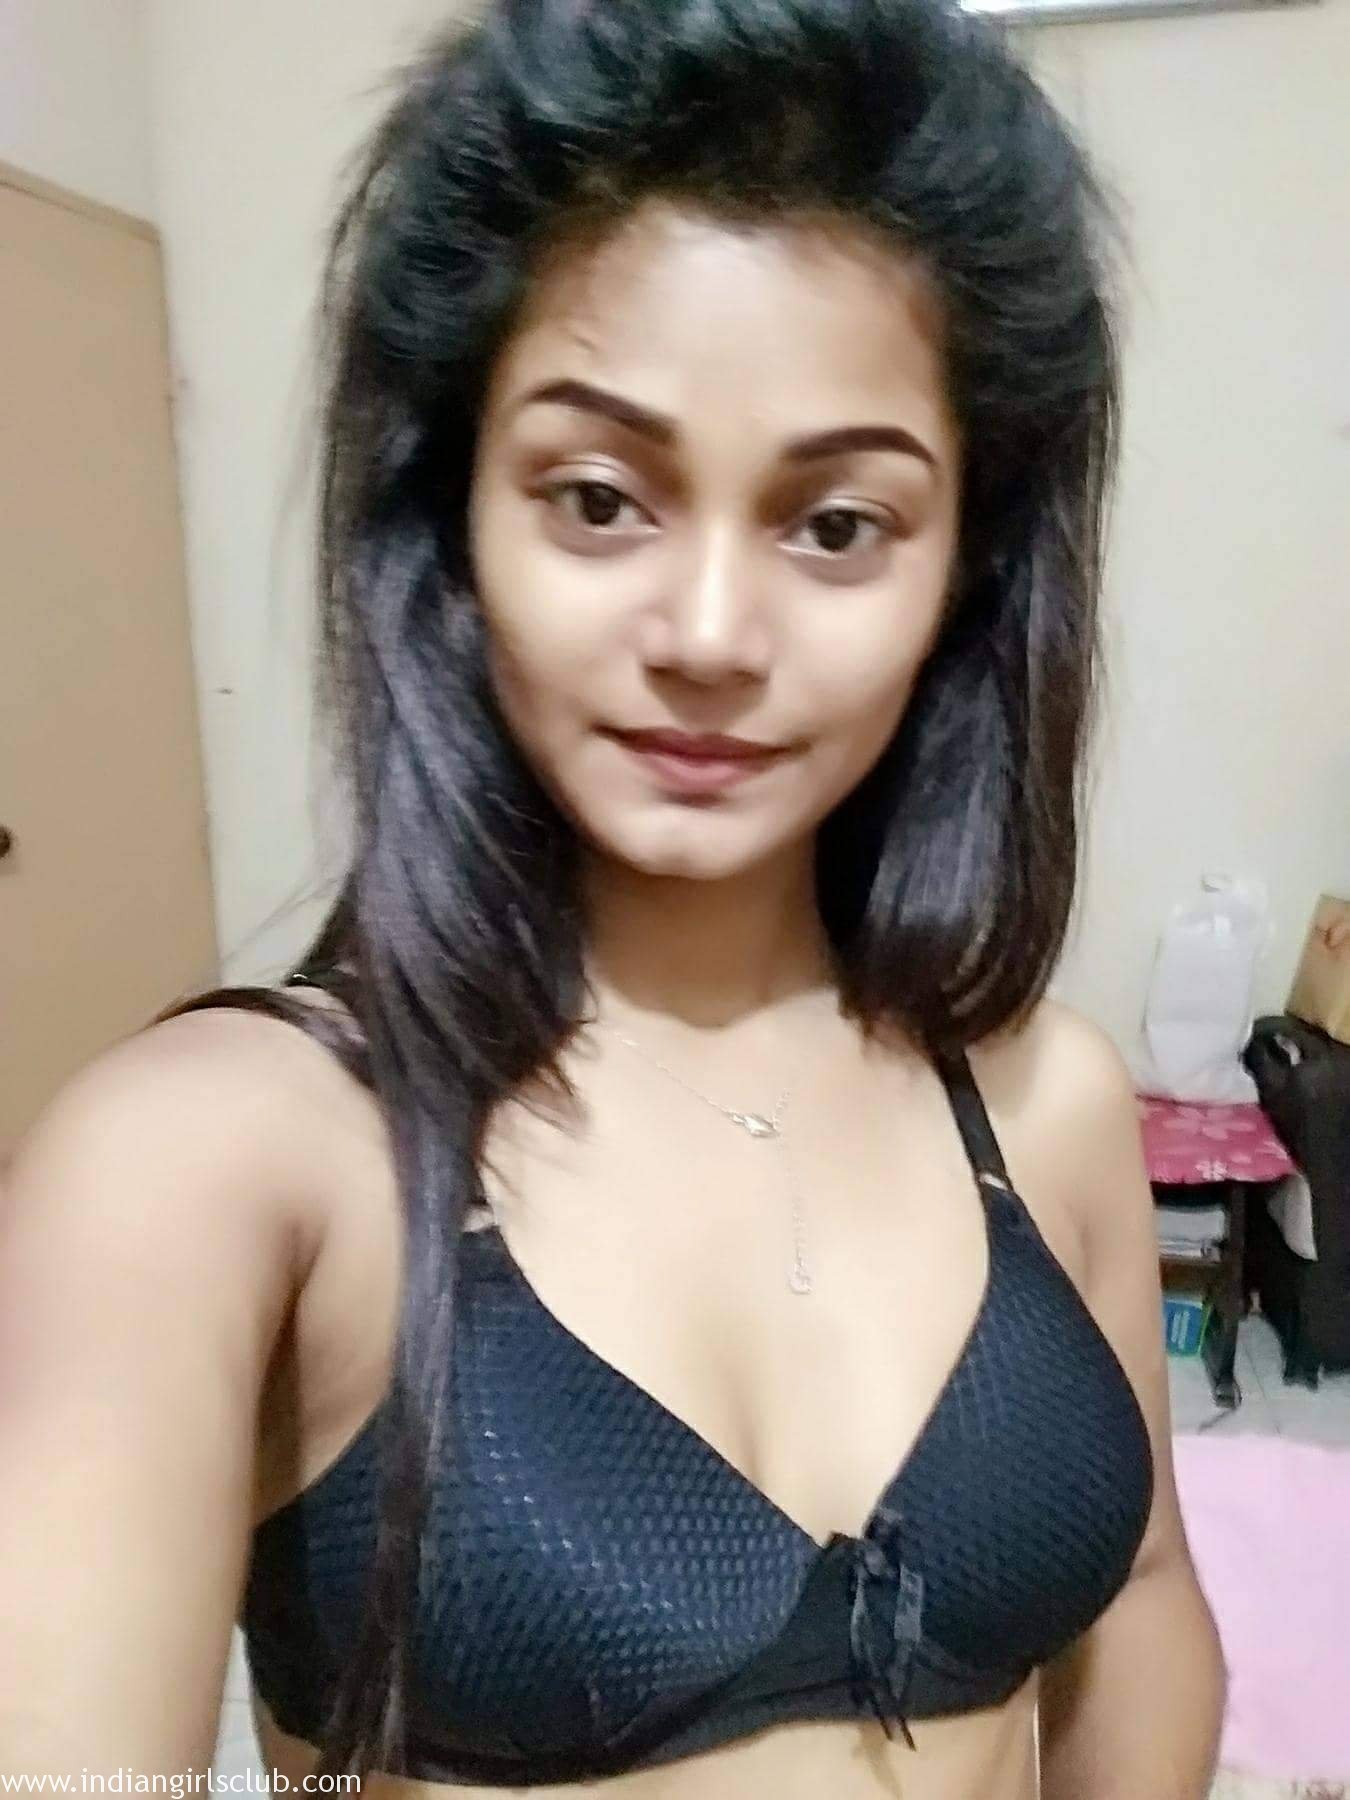 1350px x 1800px - juicy_indian_teen_homemade_porn_1 - Indian Girls Club - Nude Indian Girls &  Hot Sexy Indian Babes